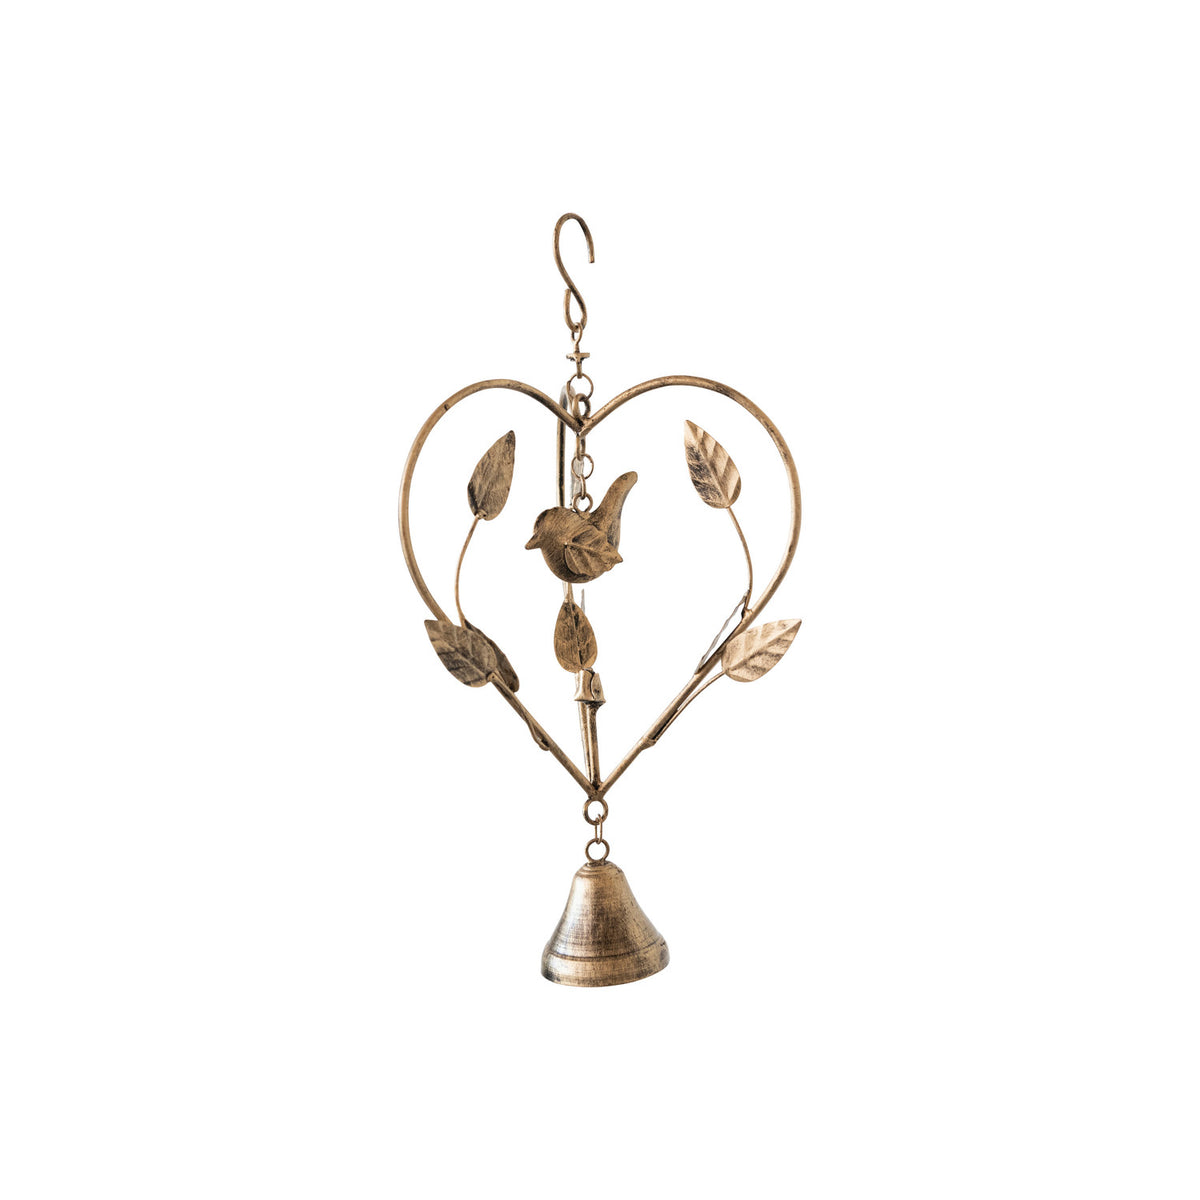 Hanging Metal Heart Shaped Décor w/ Leaves, Bird & Bell